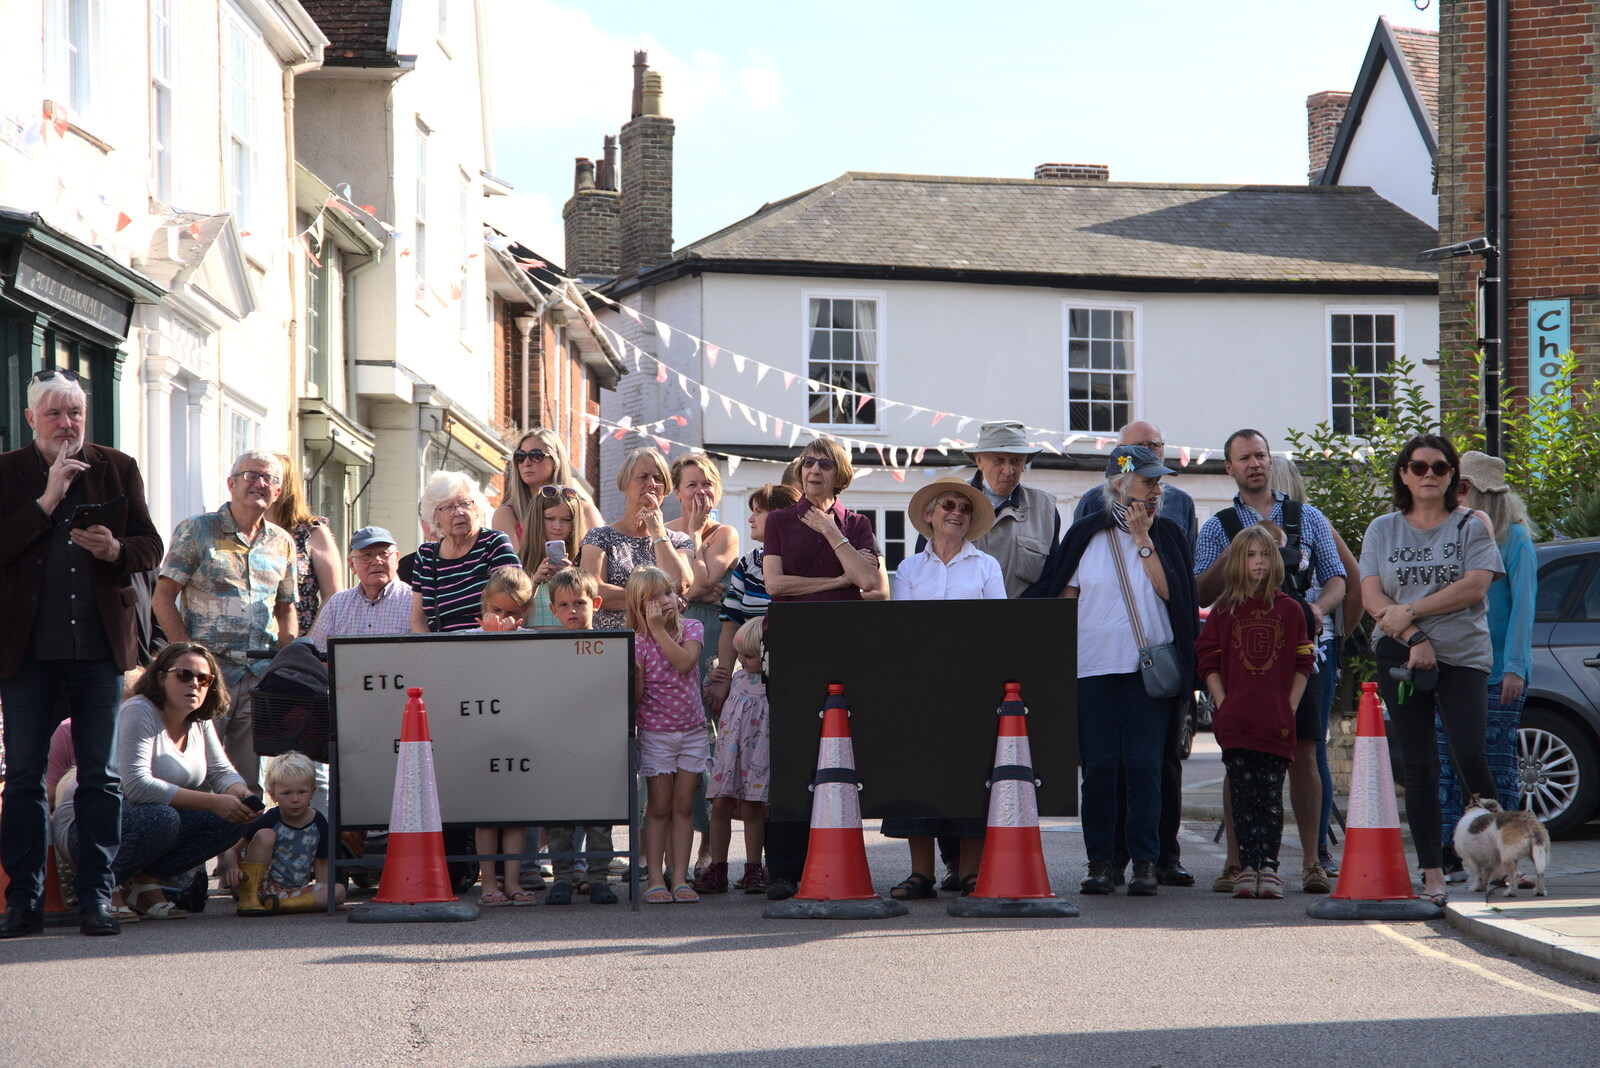 Italian Cars and a Royal Proclamation, Eye, Suffolk - 11th September 2022: The streets have been blocked off for the occasion